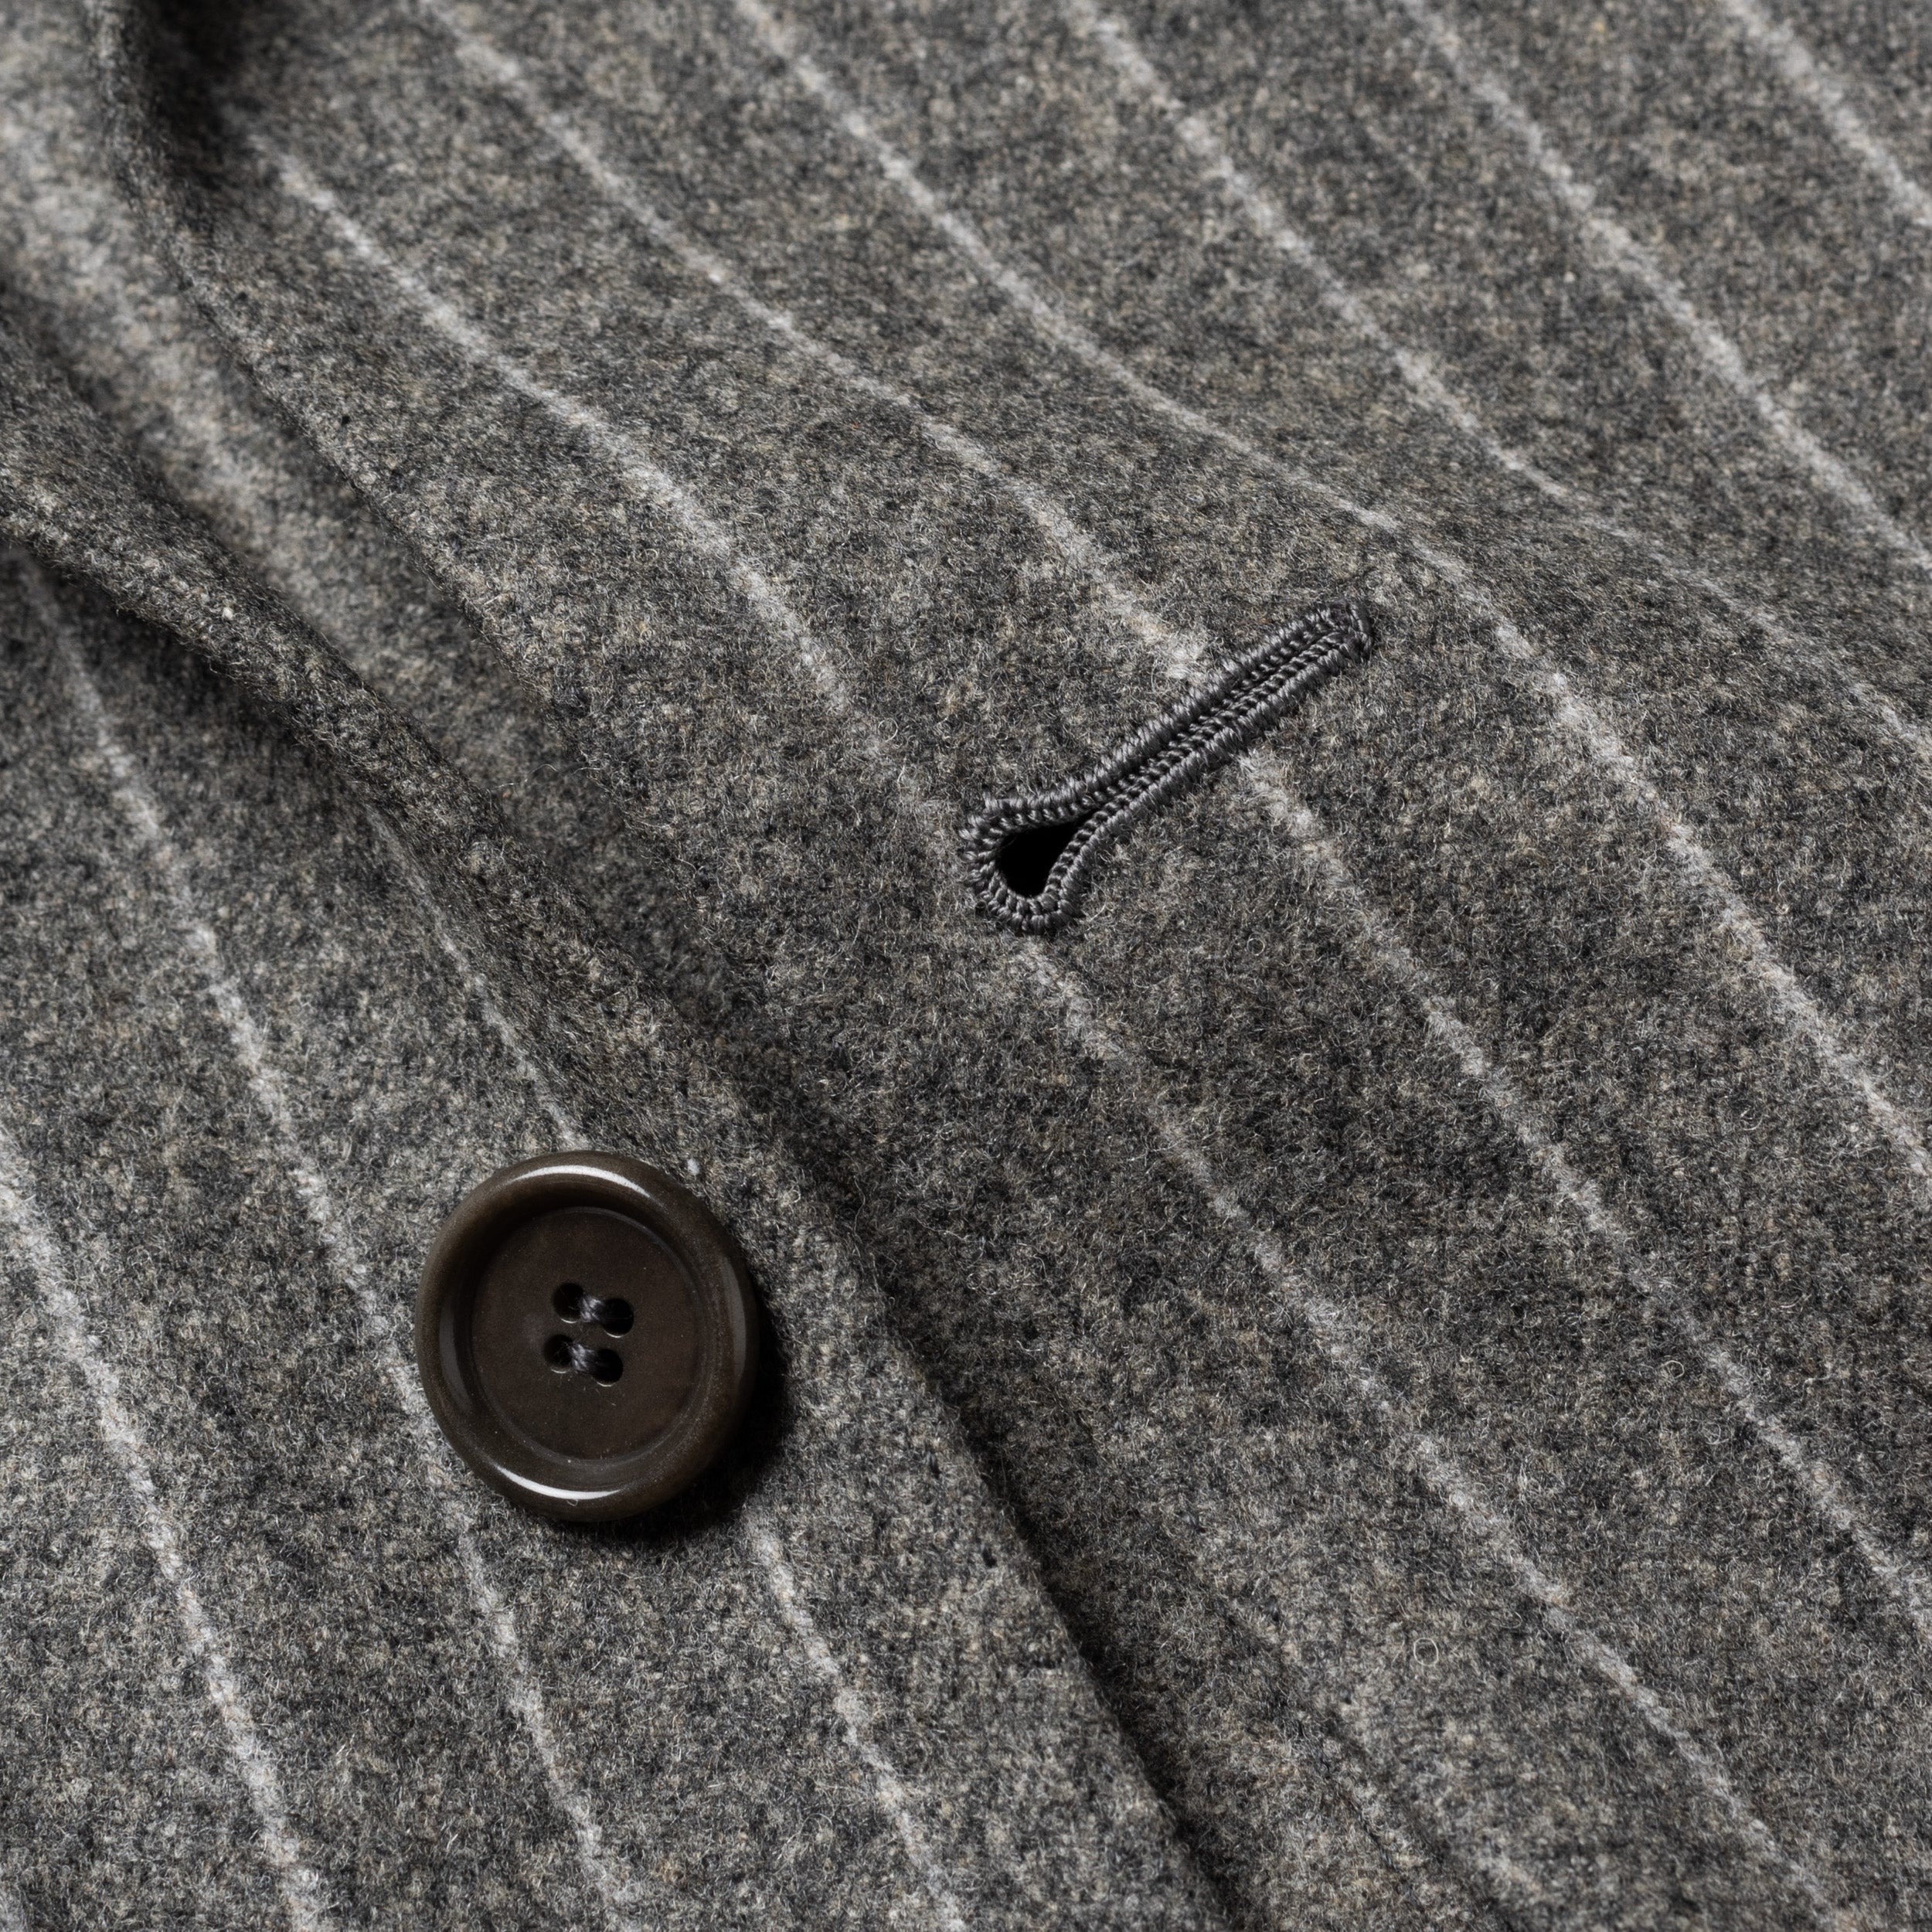 CESARE ATTOLINI Gray Striped Lambswool Cashmere Flannel Soft Suit 52 N ...